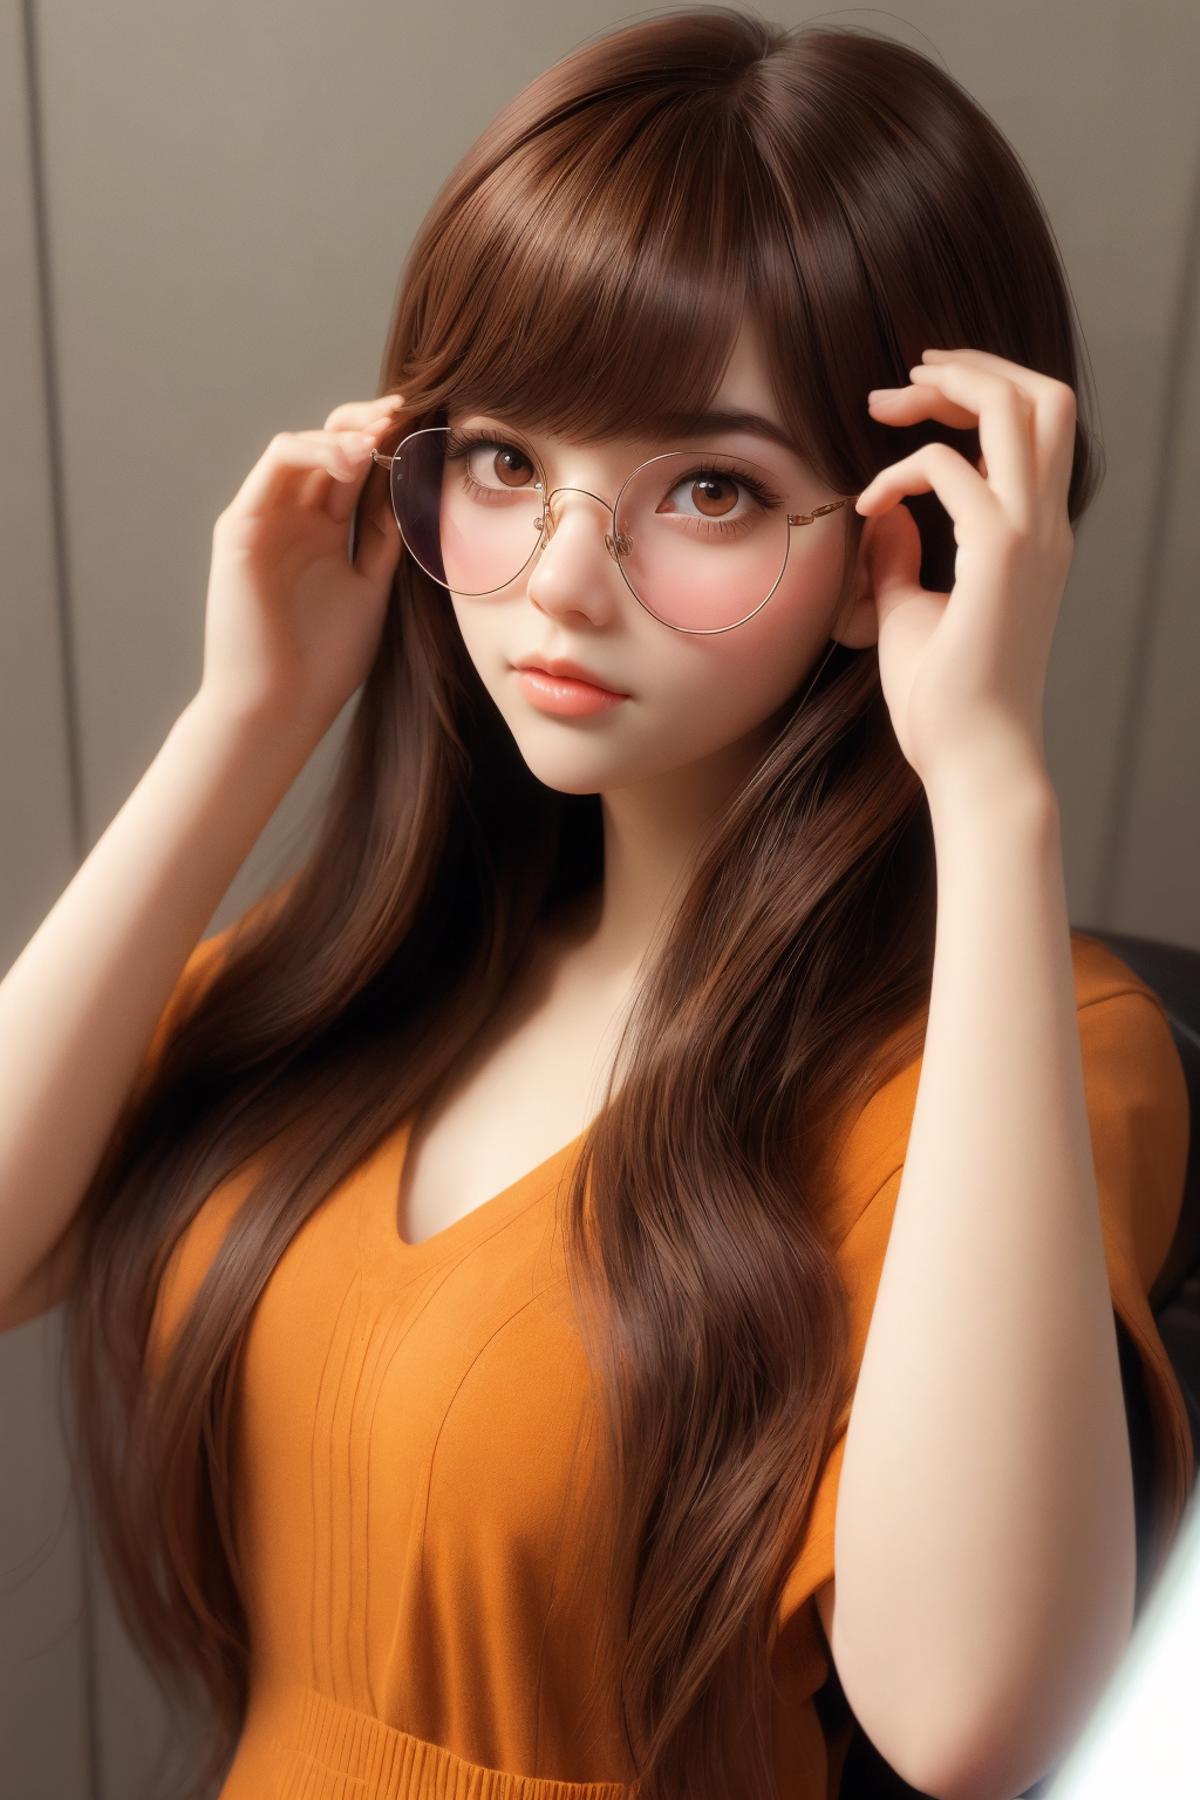 AI model image by chatgpt2023126